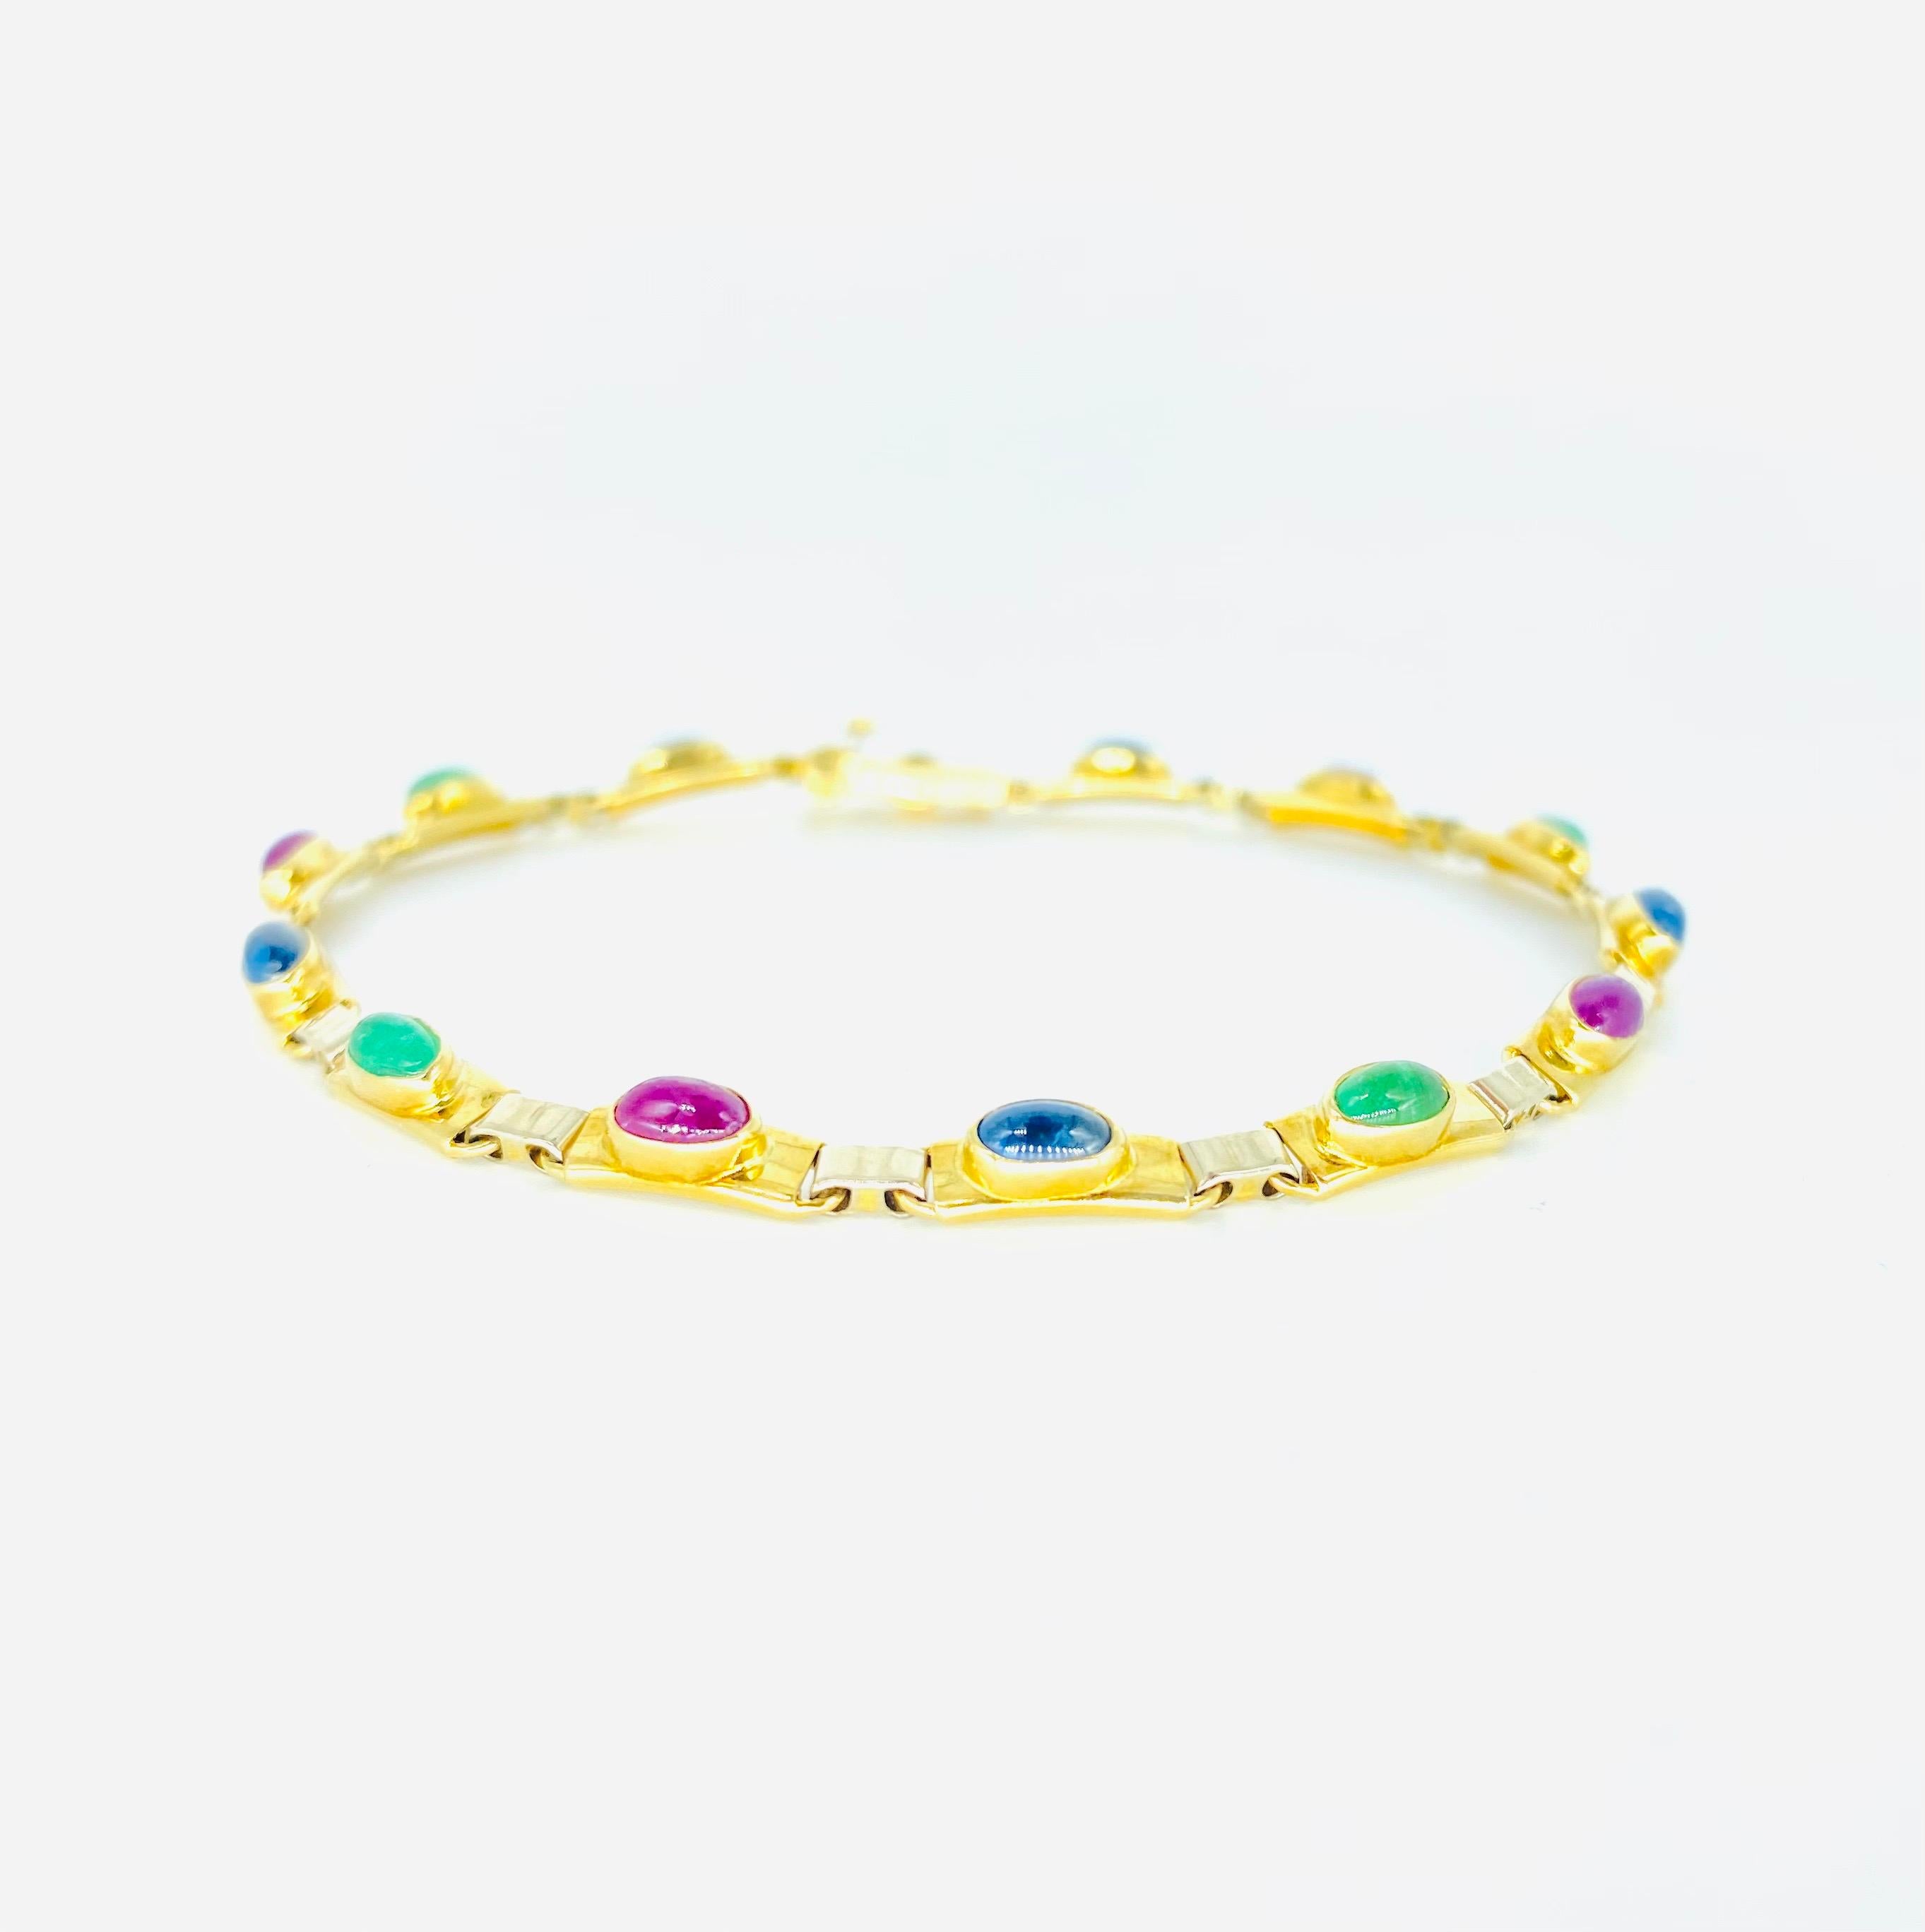 Retro Multi-Color Oval Cabochon Emerald, Ruby & Sapphire Tennis Bracelet. Beautiful bracelet featuring precious cabochon cut gemstones all around crafted in 14k yellow gold and white gold. There is also a secure closure lock for extra security. The